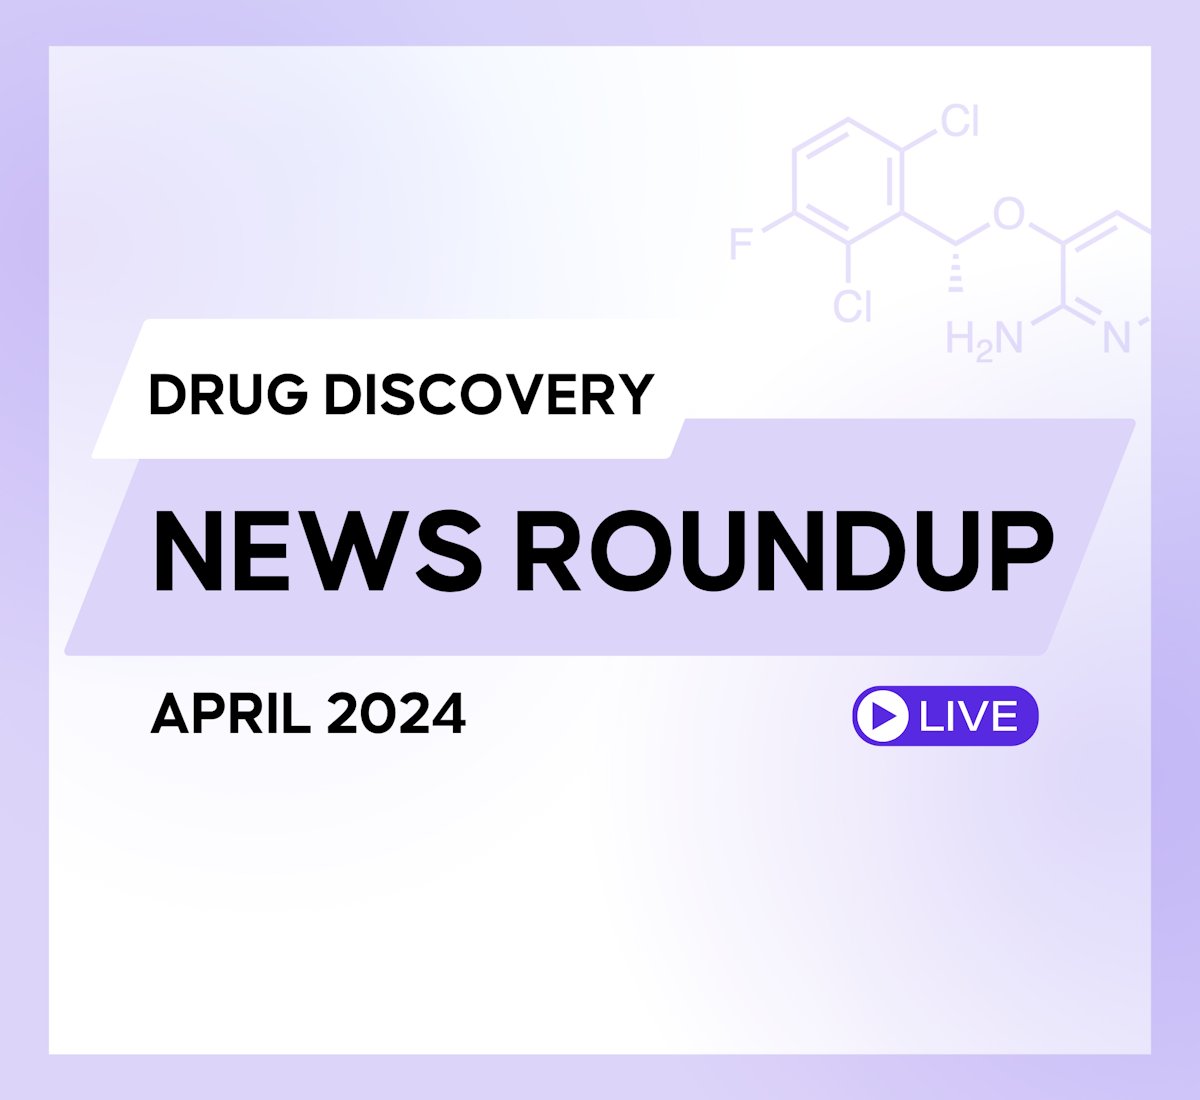 Drug Discovery News Roundup from April 2024

In case you missed anything, here’s a recap of the most notable drug discovery news highlights from April 2024!

Link | drughunters.com/4bttIFF